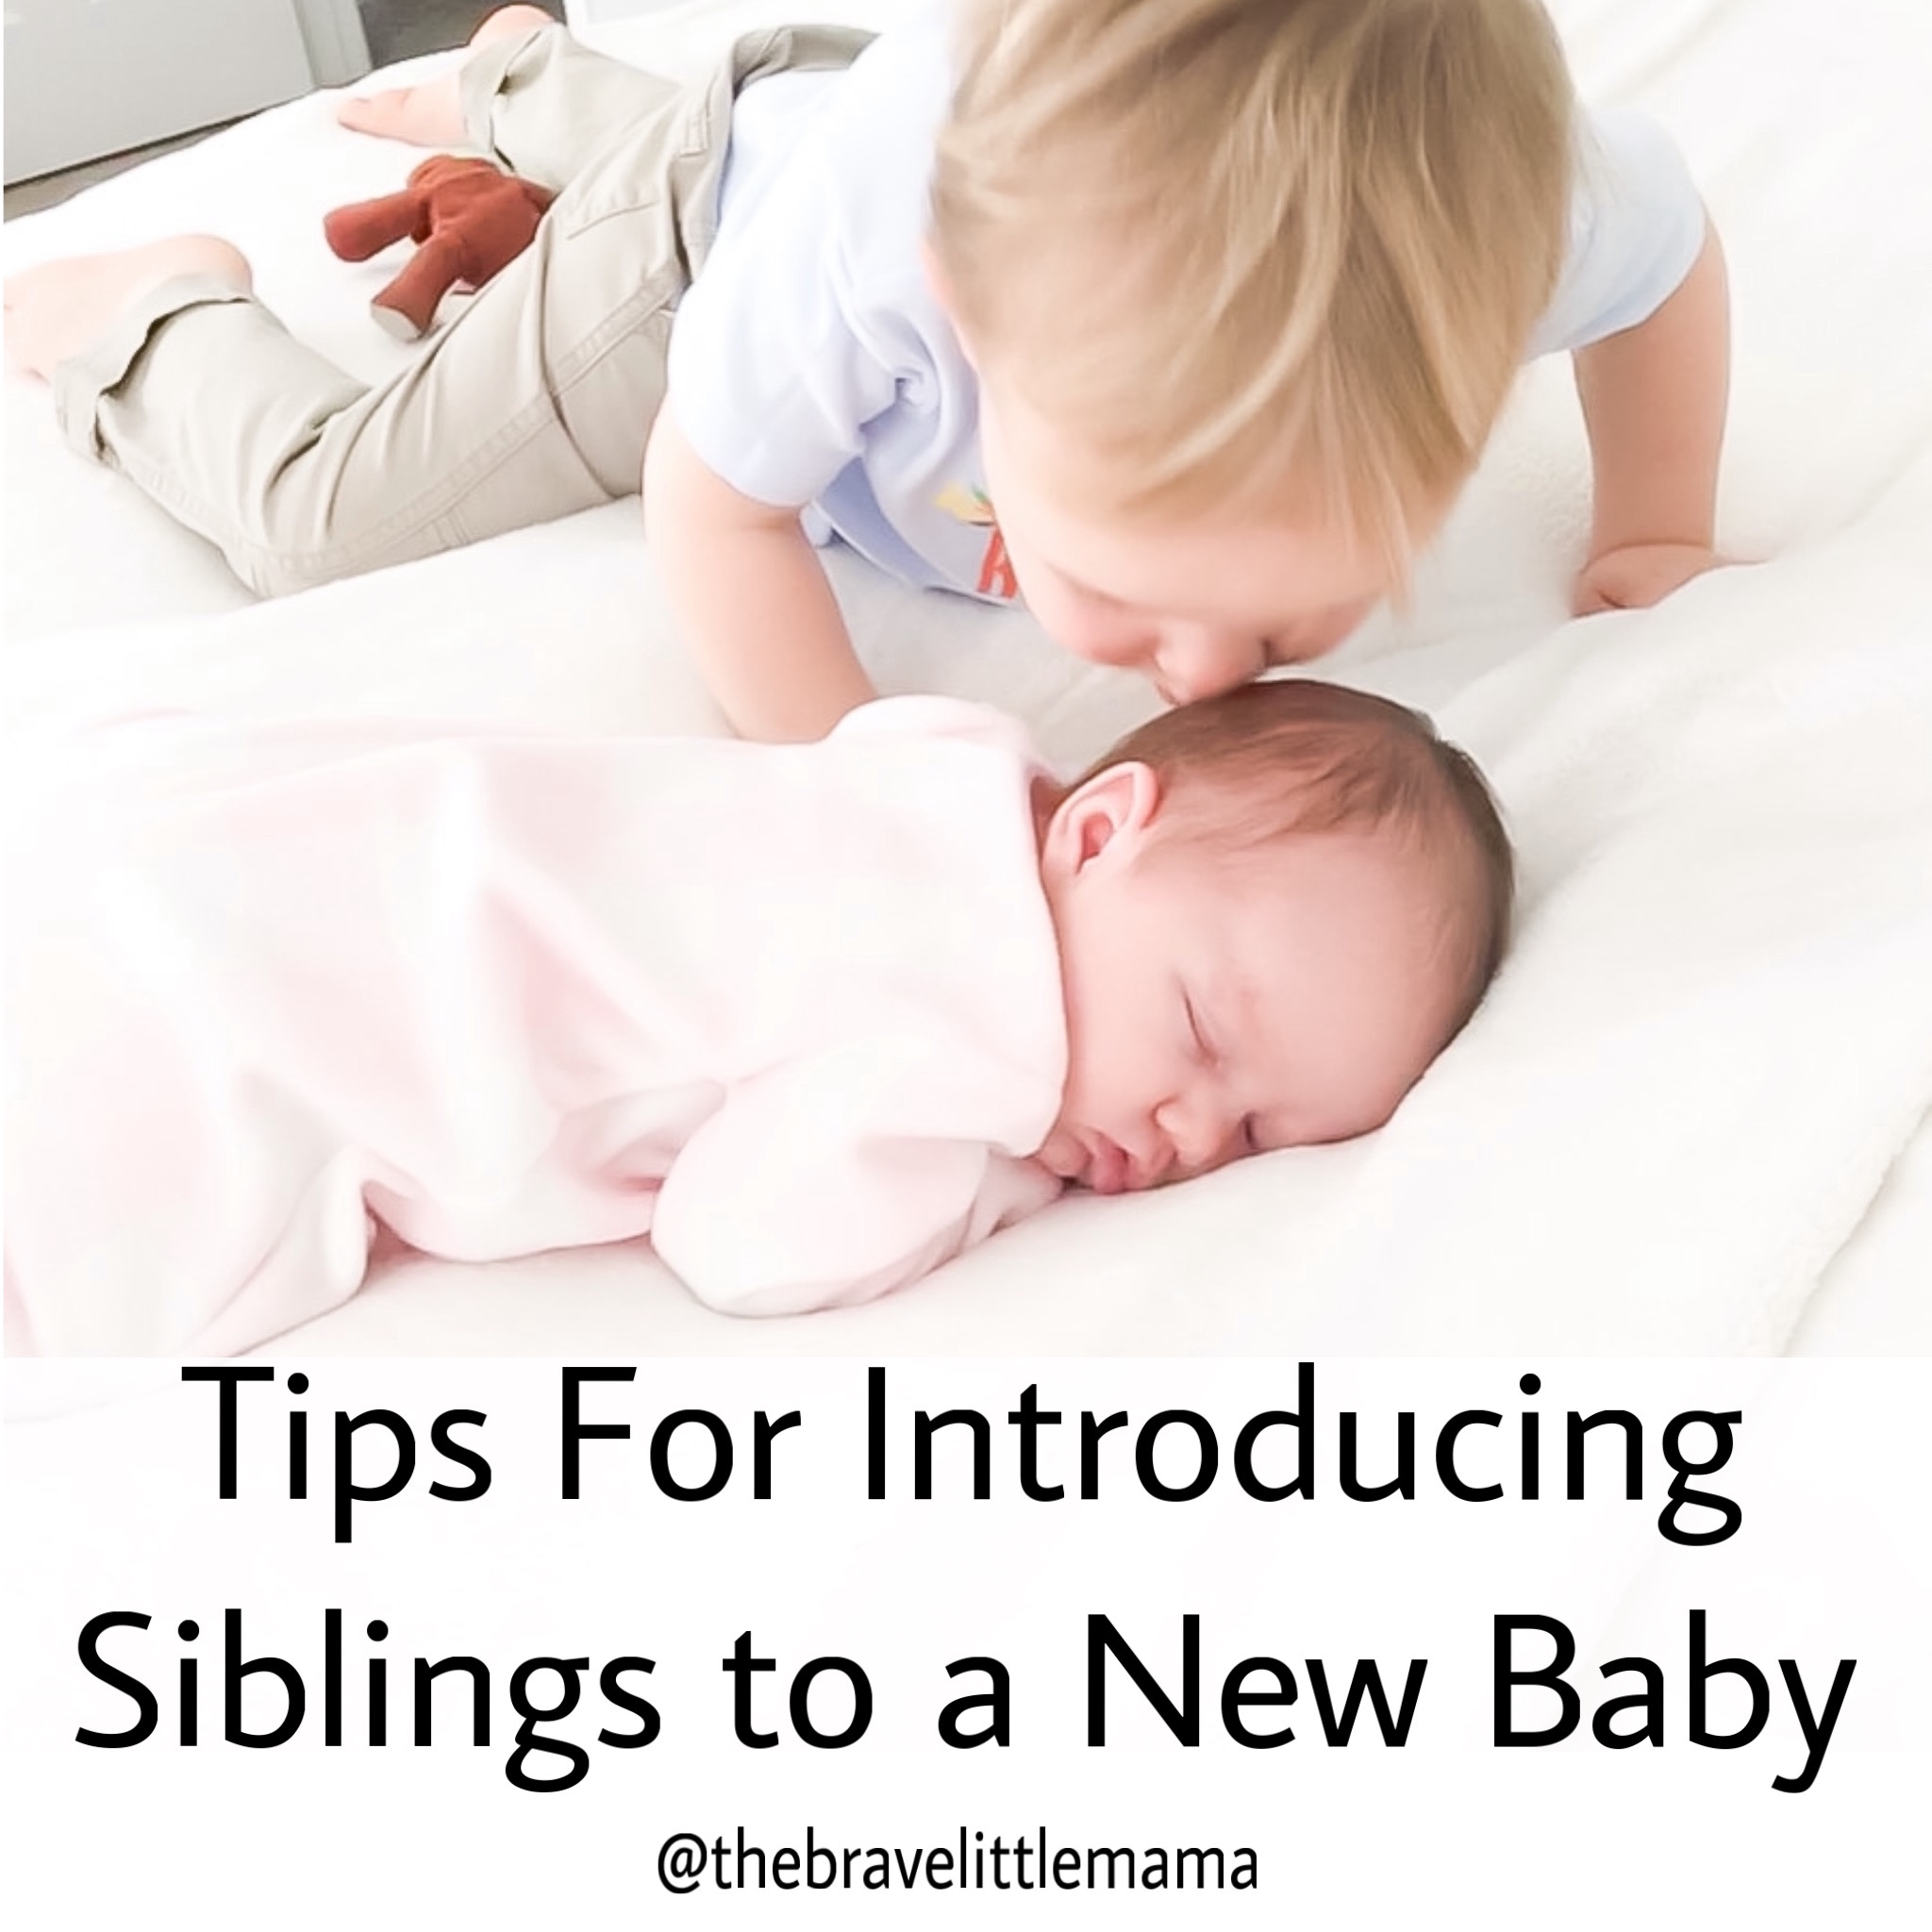 Tips for Introducing Siblings to a New Baby